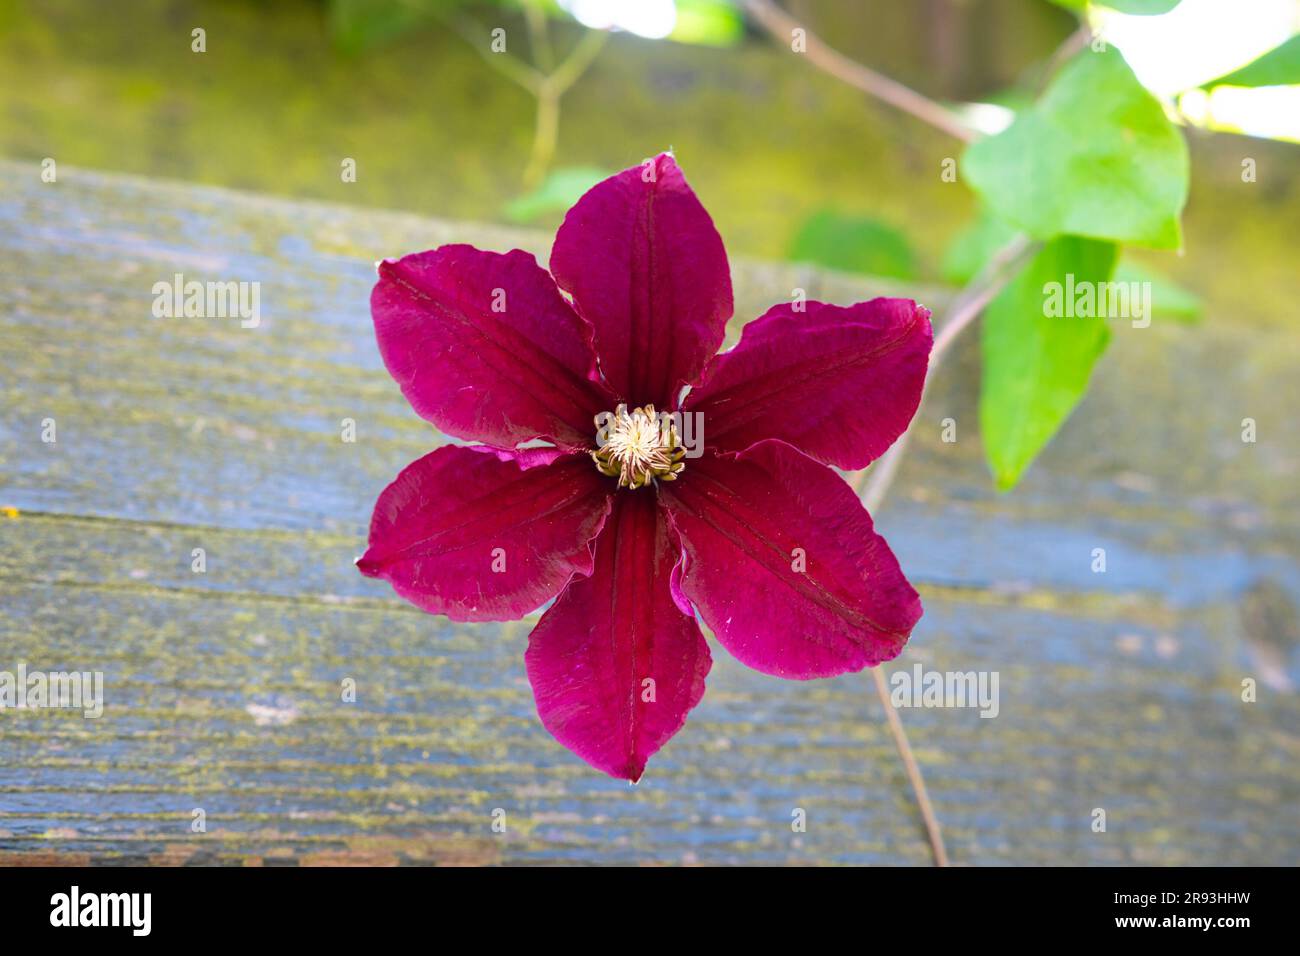 Detailed photograph of a purple colored Clematis flower Stock Photo